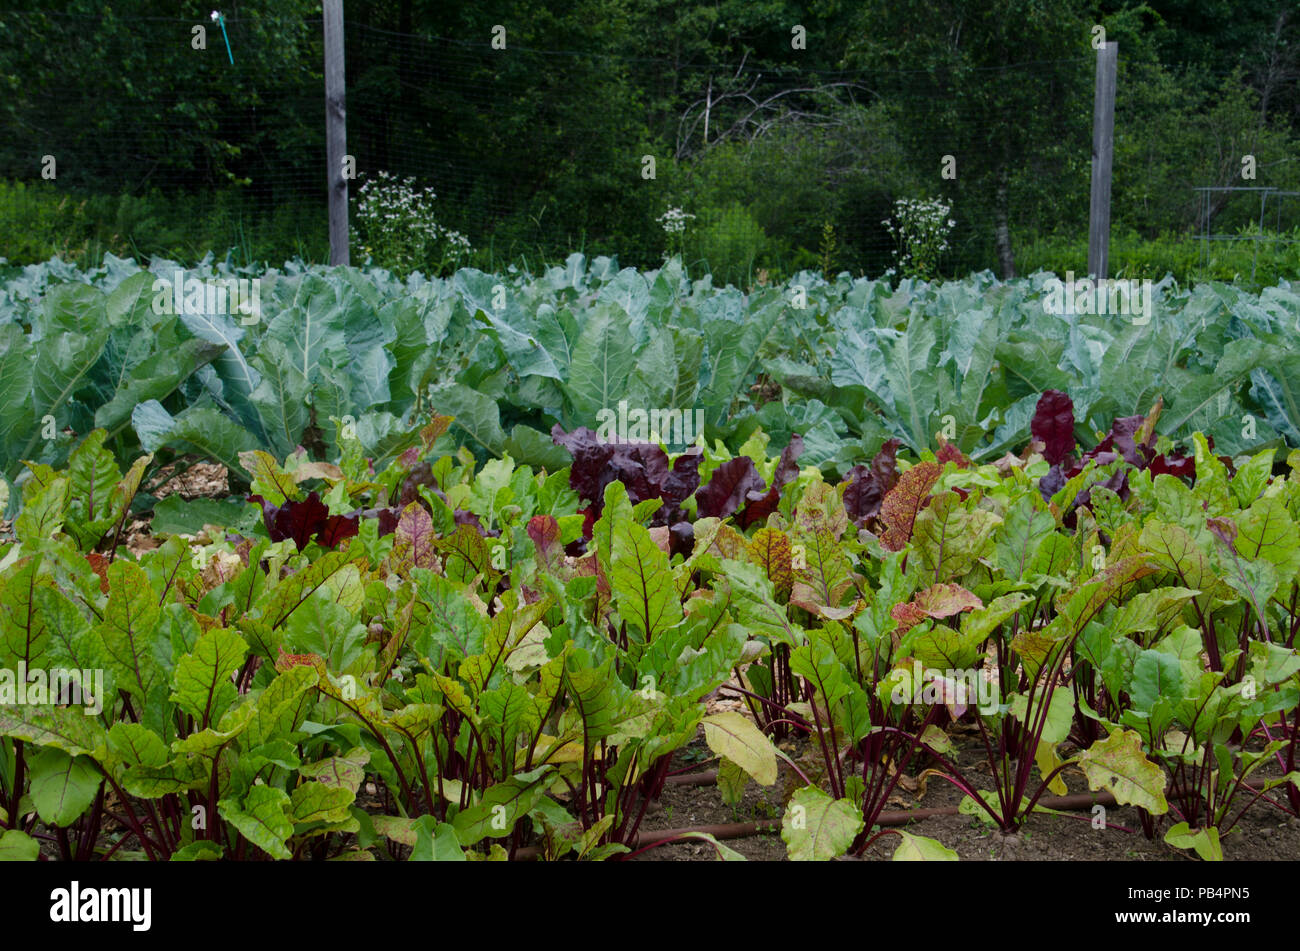 Beets and broccoli plants in community Garden, maine Stock Photo